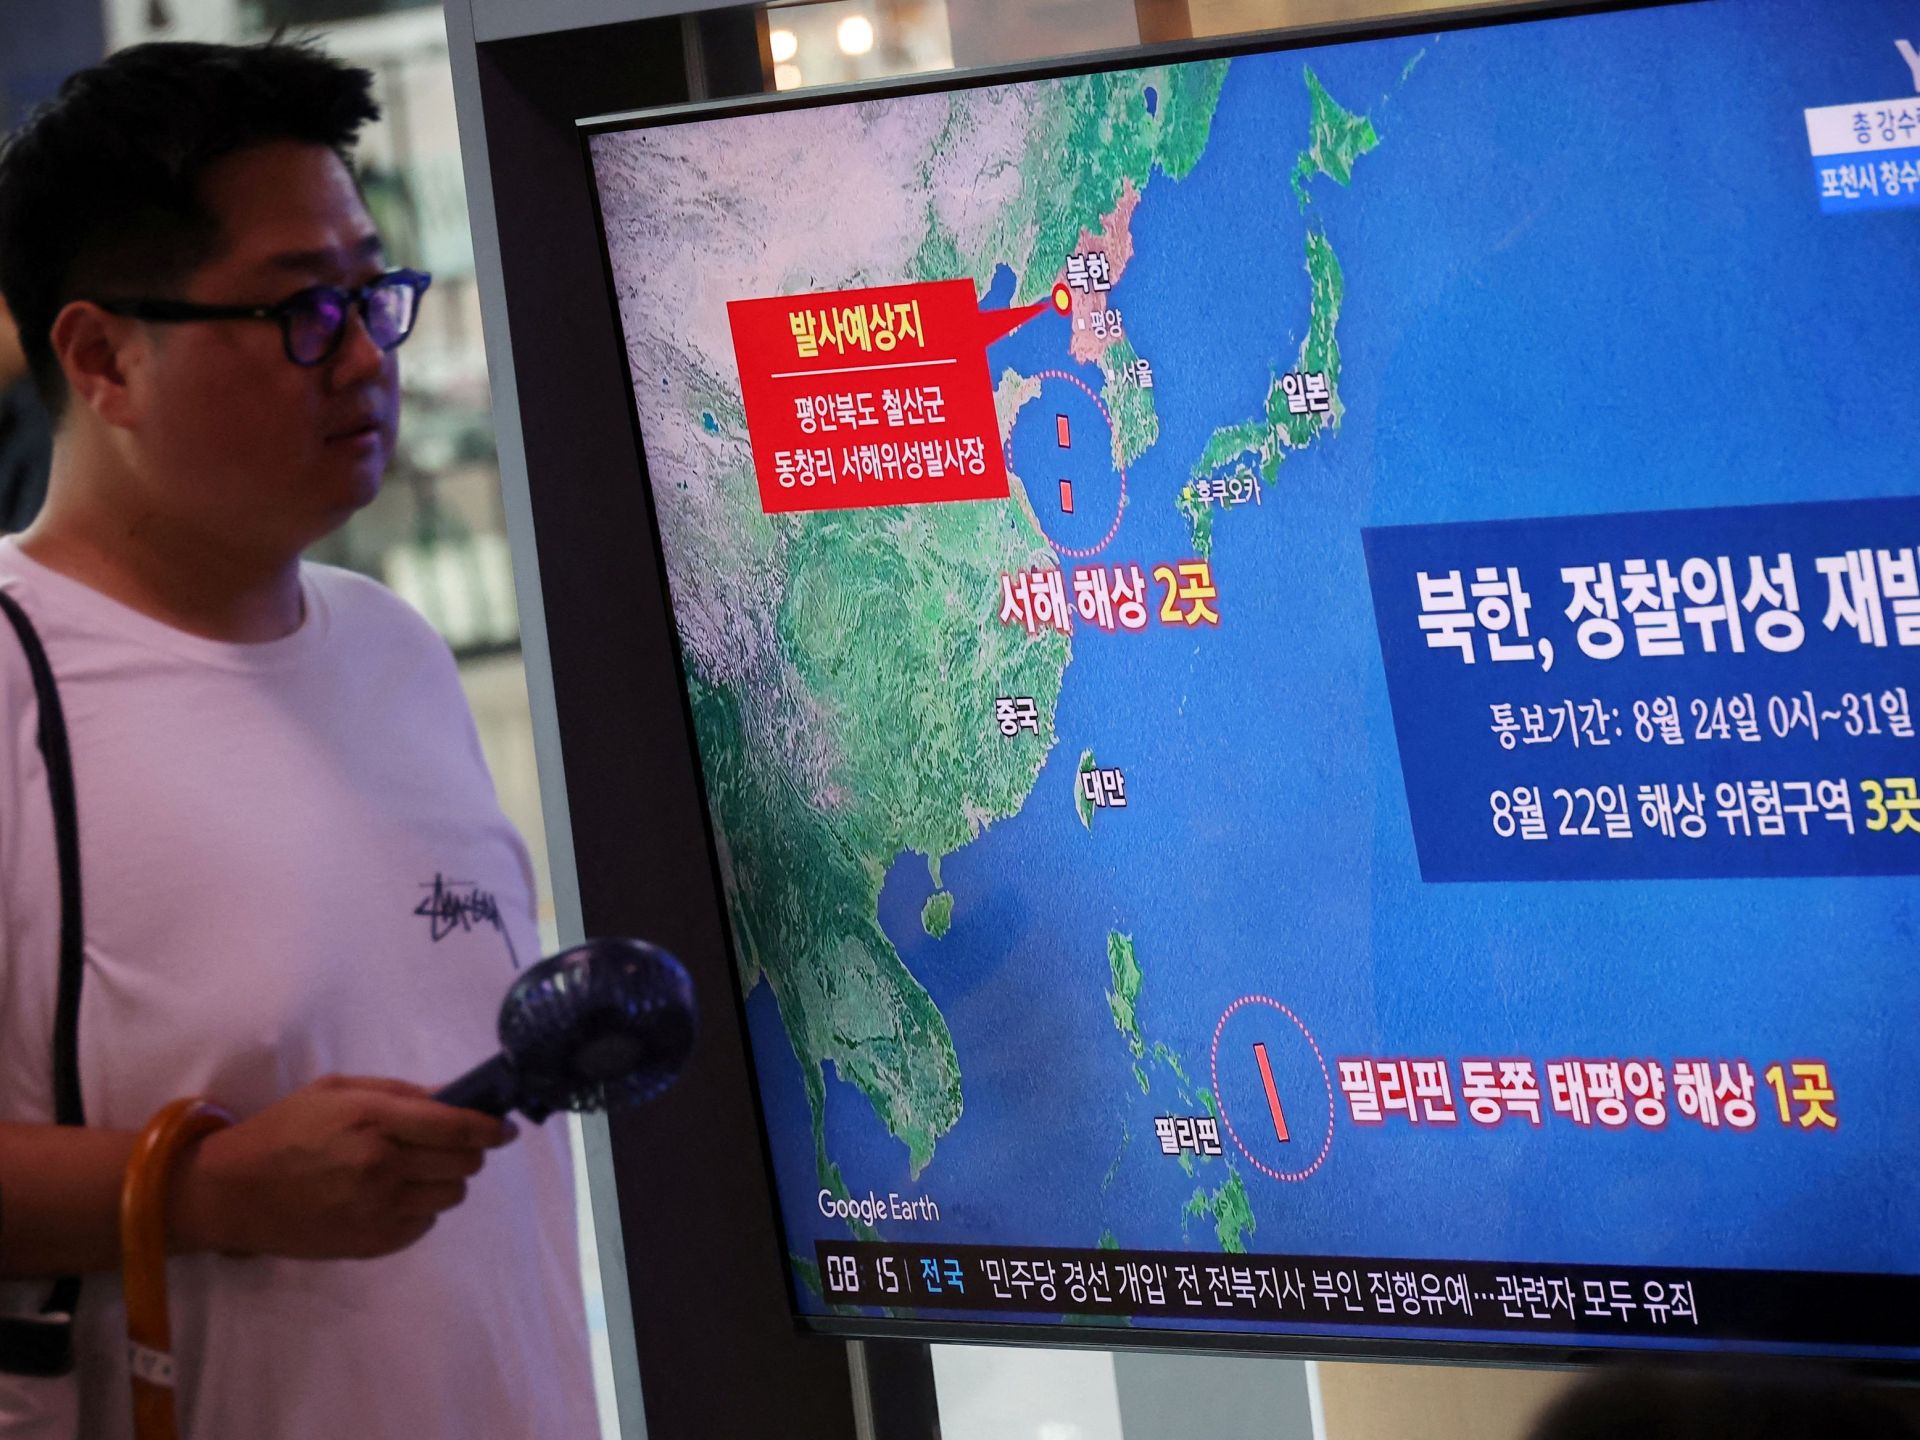 North Korea could launch spy satellite as early as this week